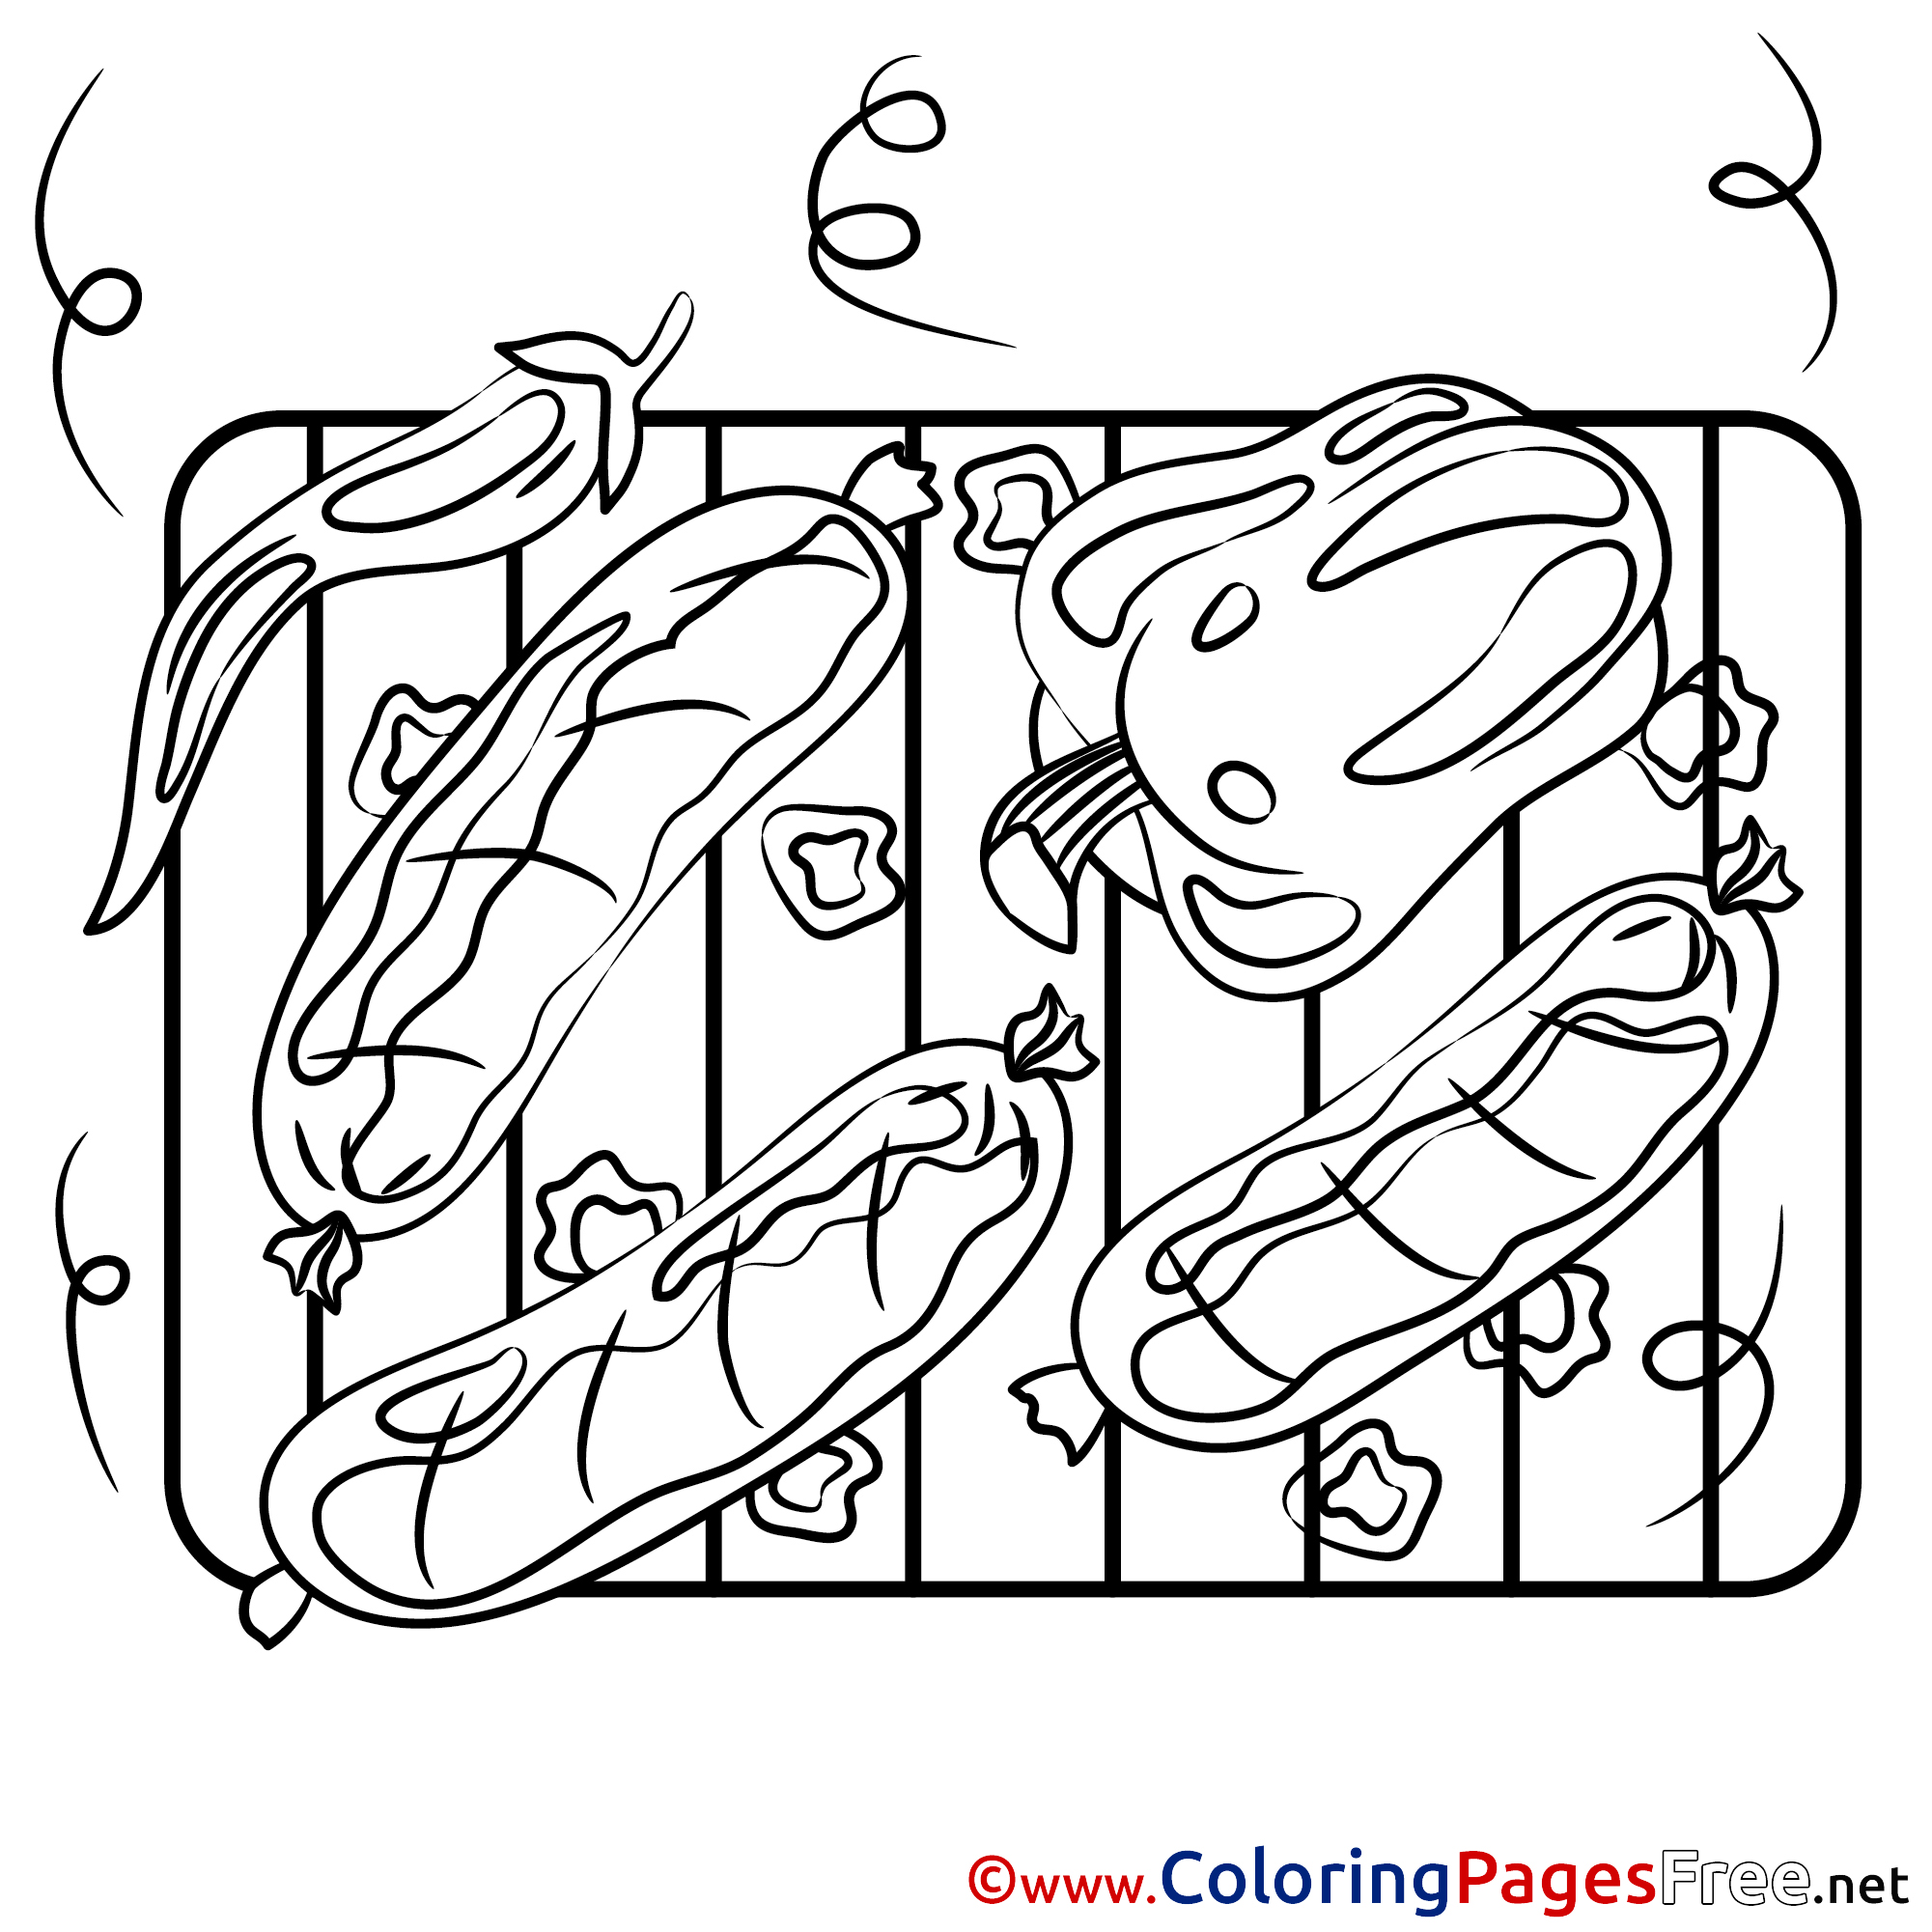 Download Hot Dogs download Colouring Page